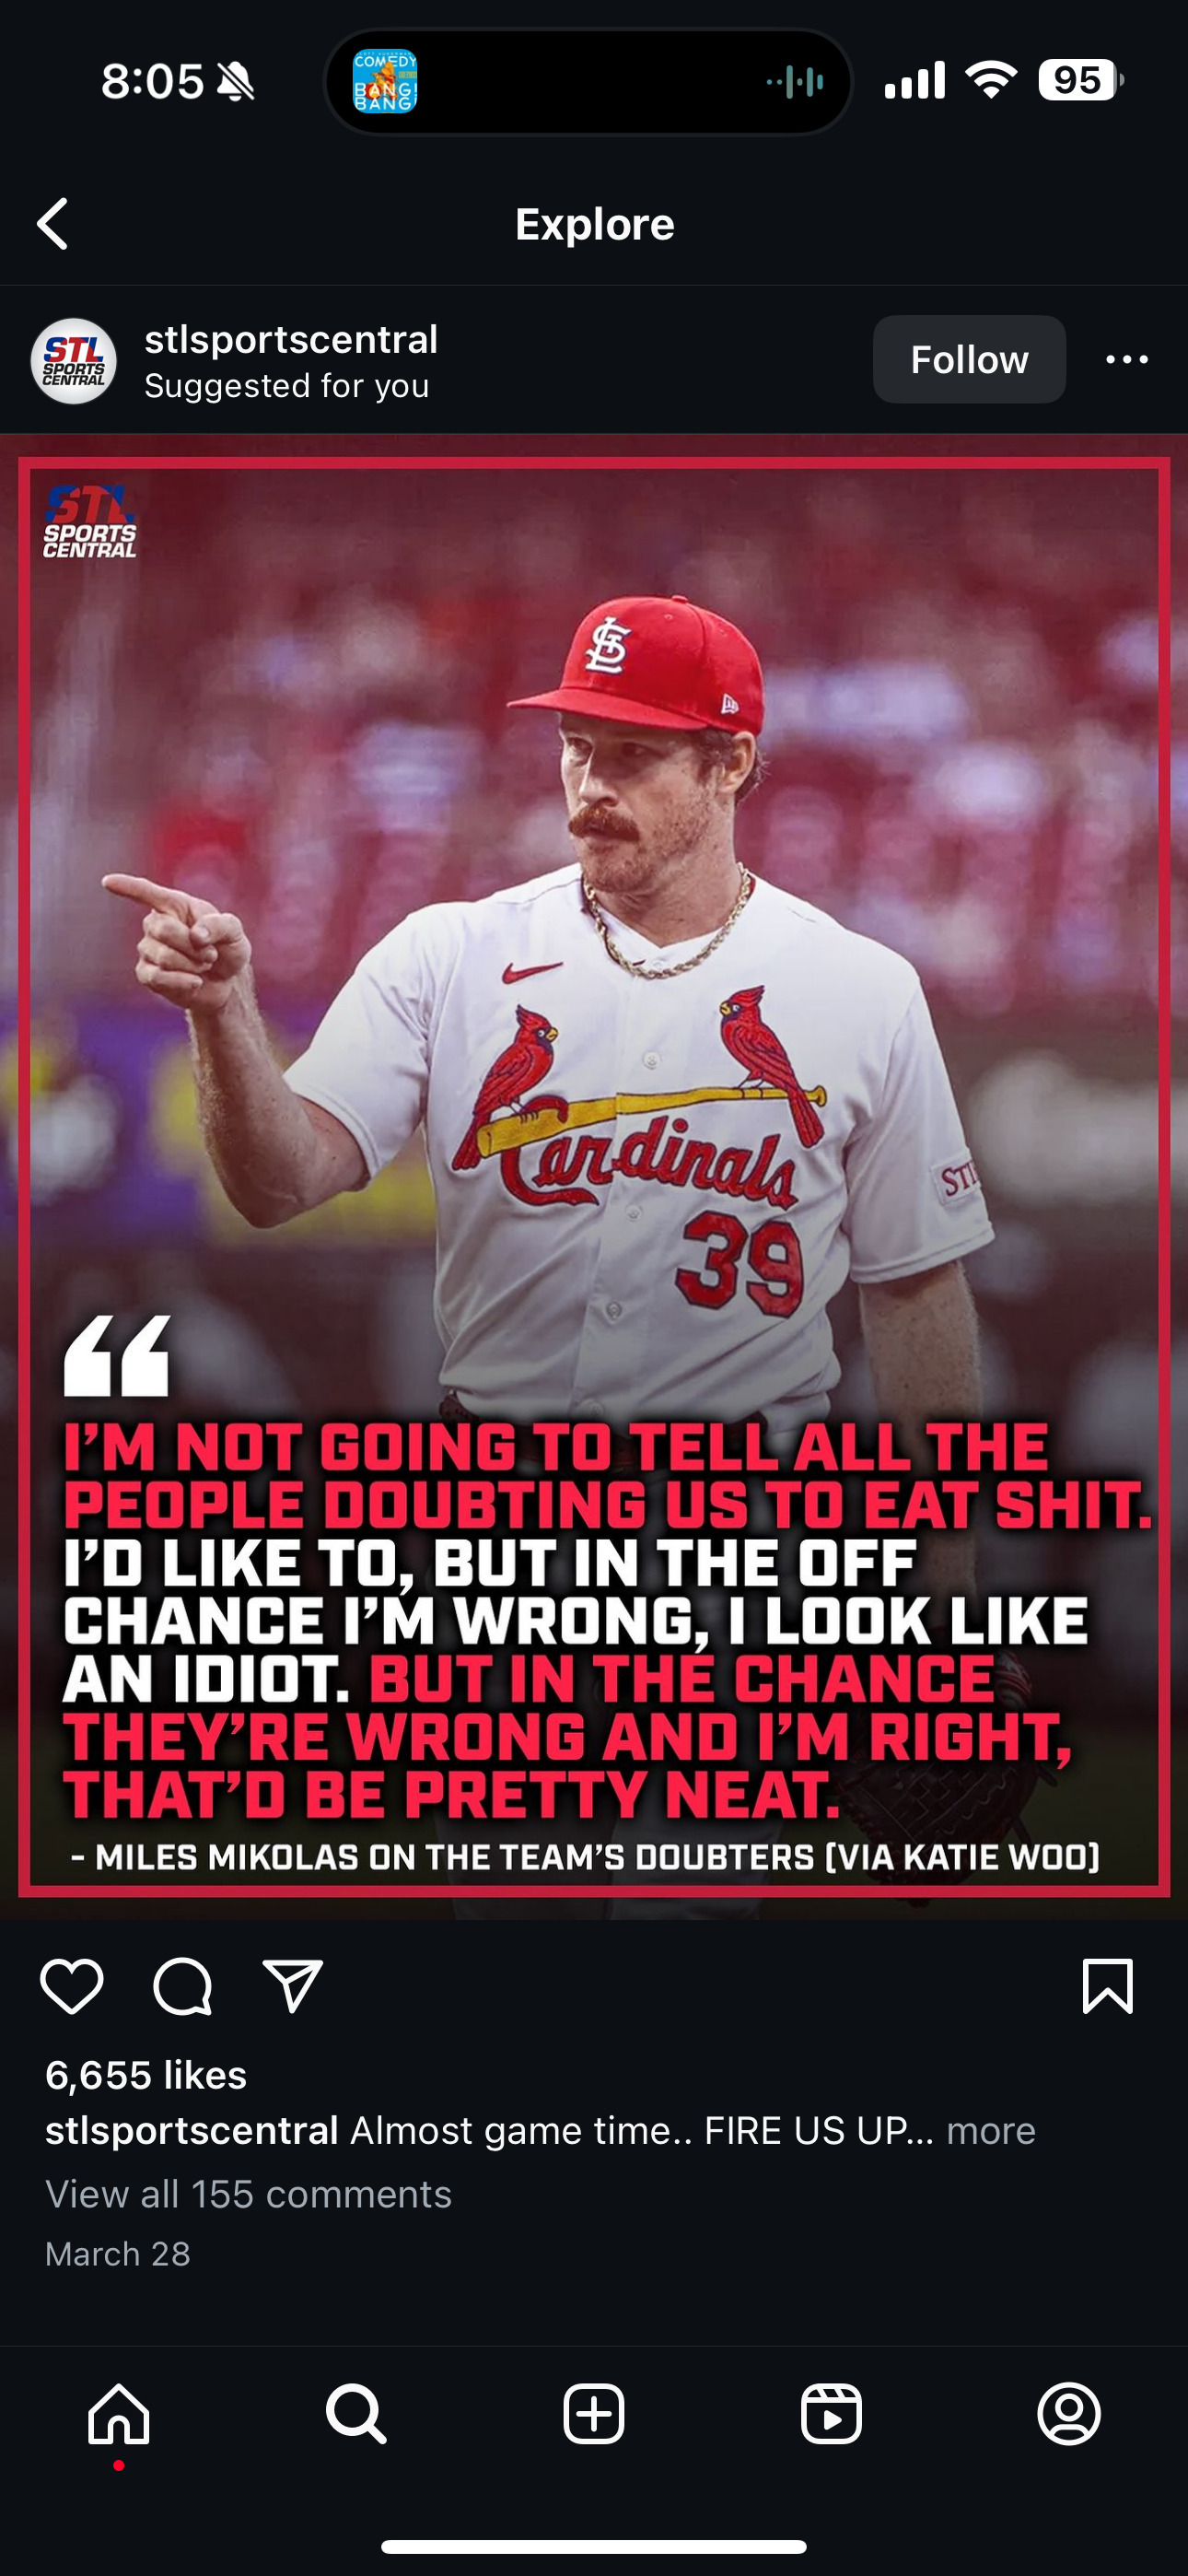 Miles mikolas telling haters to eat shit in march. It’s May and the cardinals are the ones eating shit.